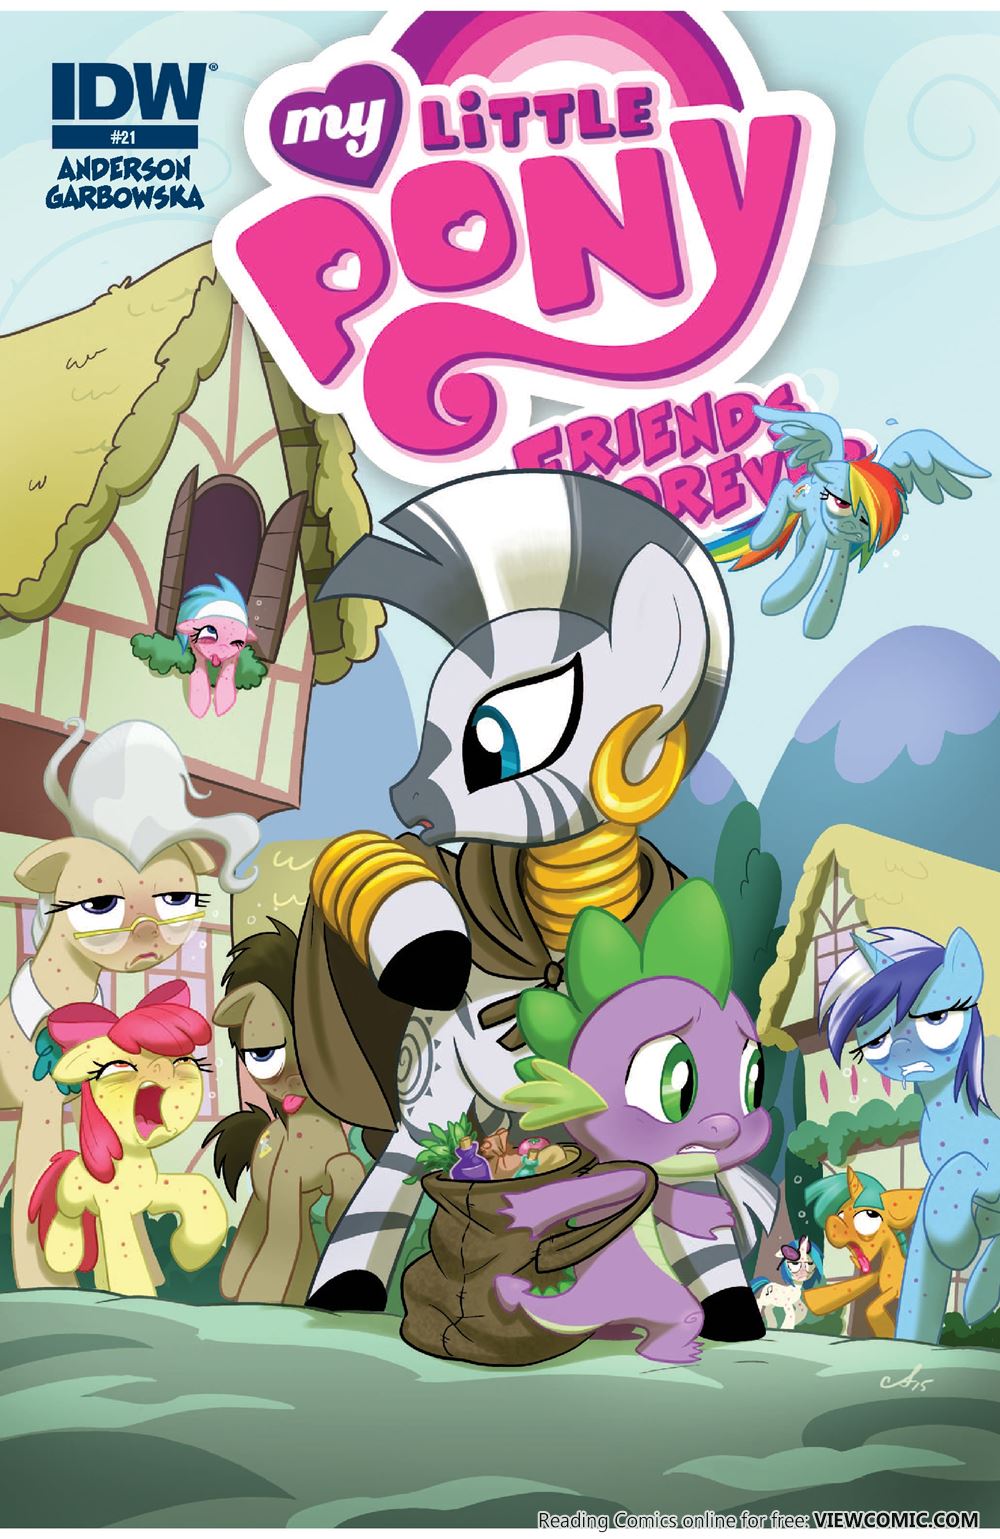 My Little Pony Friends Forever 021 2015 | Read My Little Pony Friends  Forever 021 2015 comic online in high quality. Read Full Comic online for  free - Read comics online in high quality .| READ COMIC ONLINE